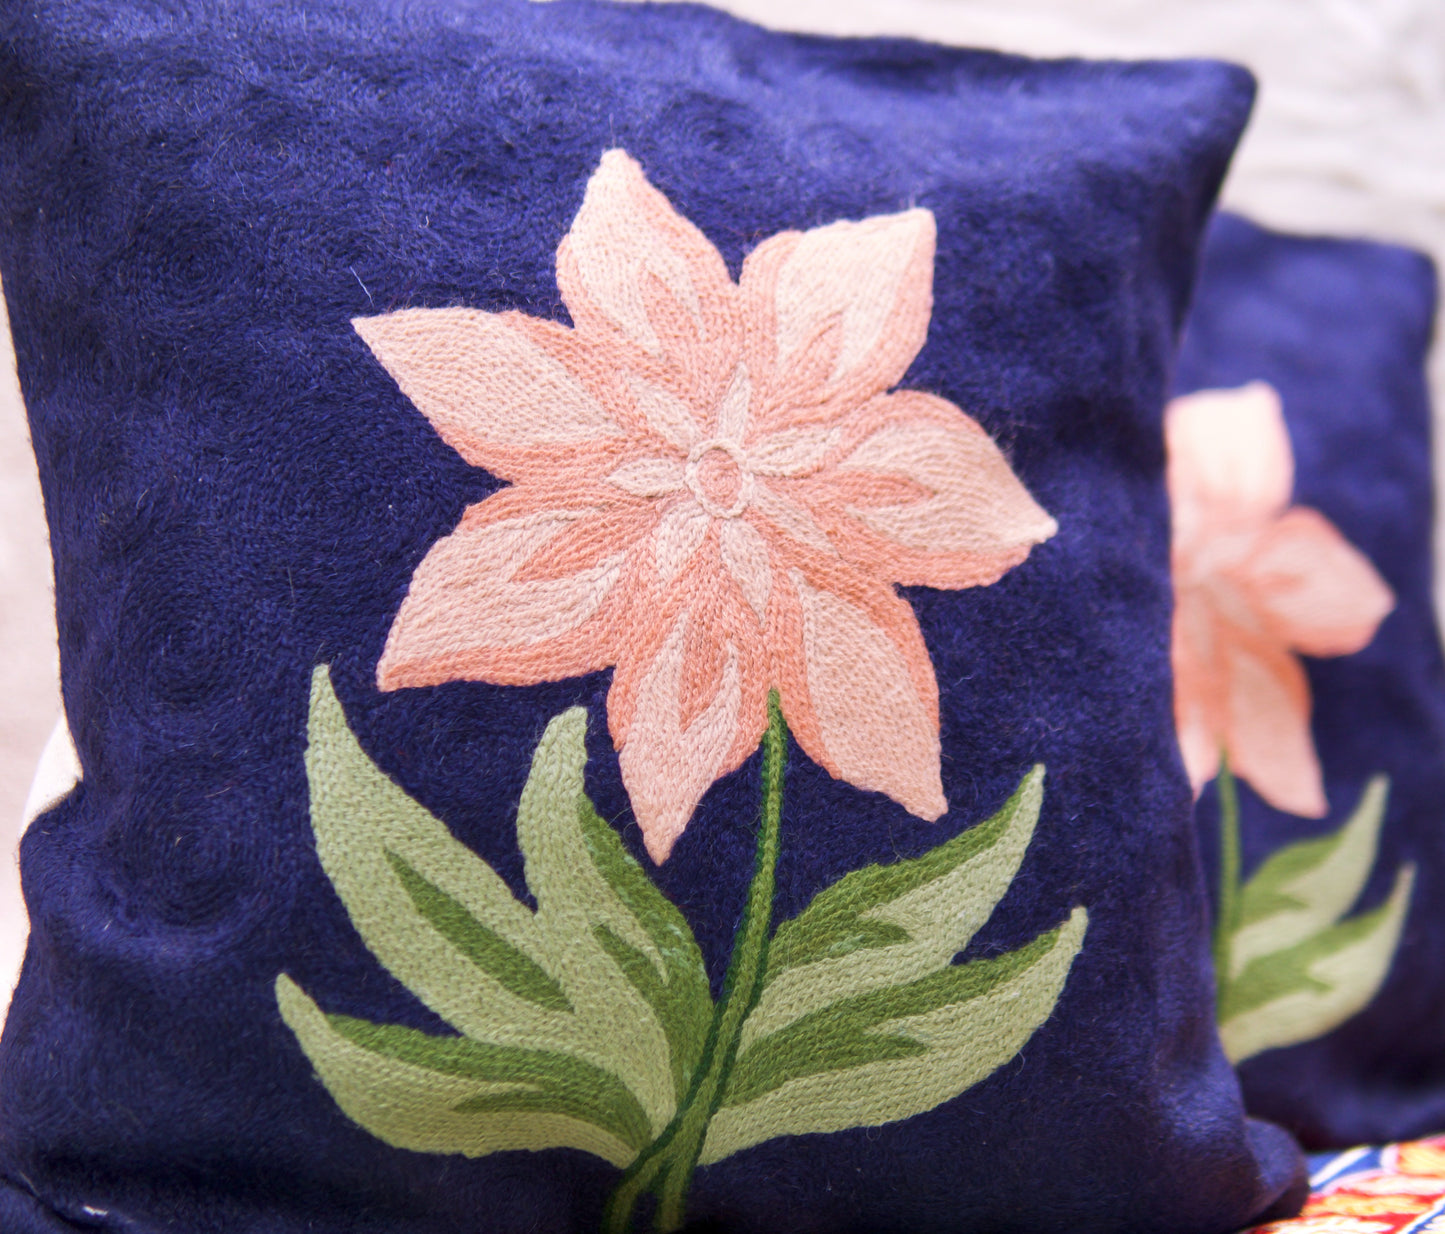 Summer Bloom Cushion Covers with Hand Embroidery in Wool (Set of 2)